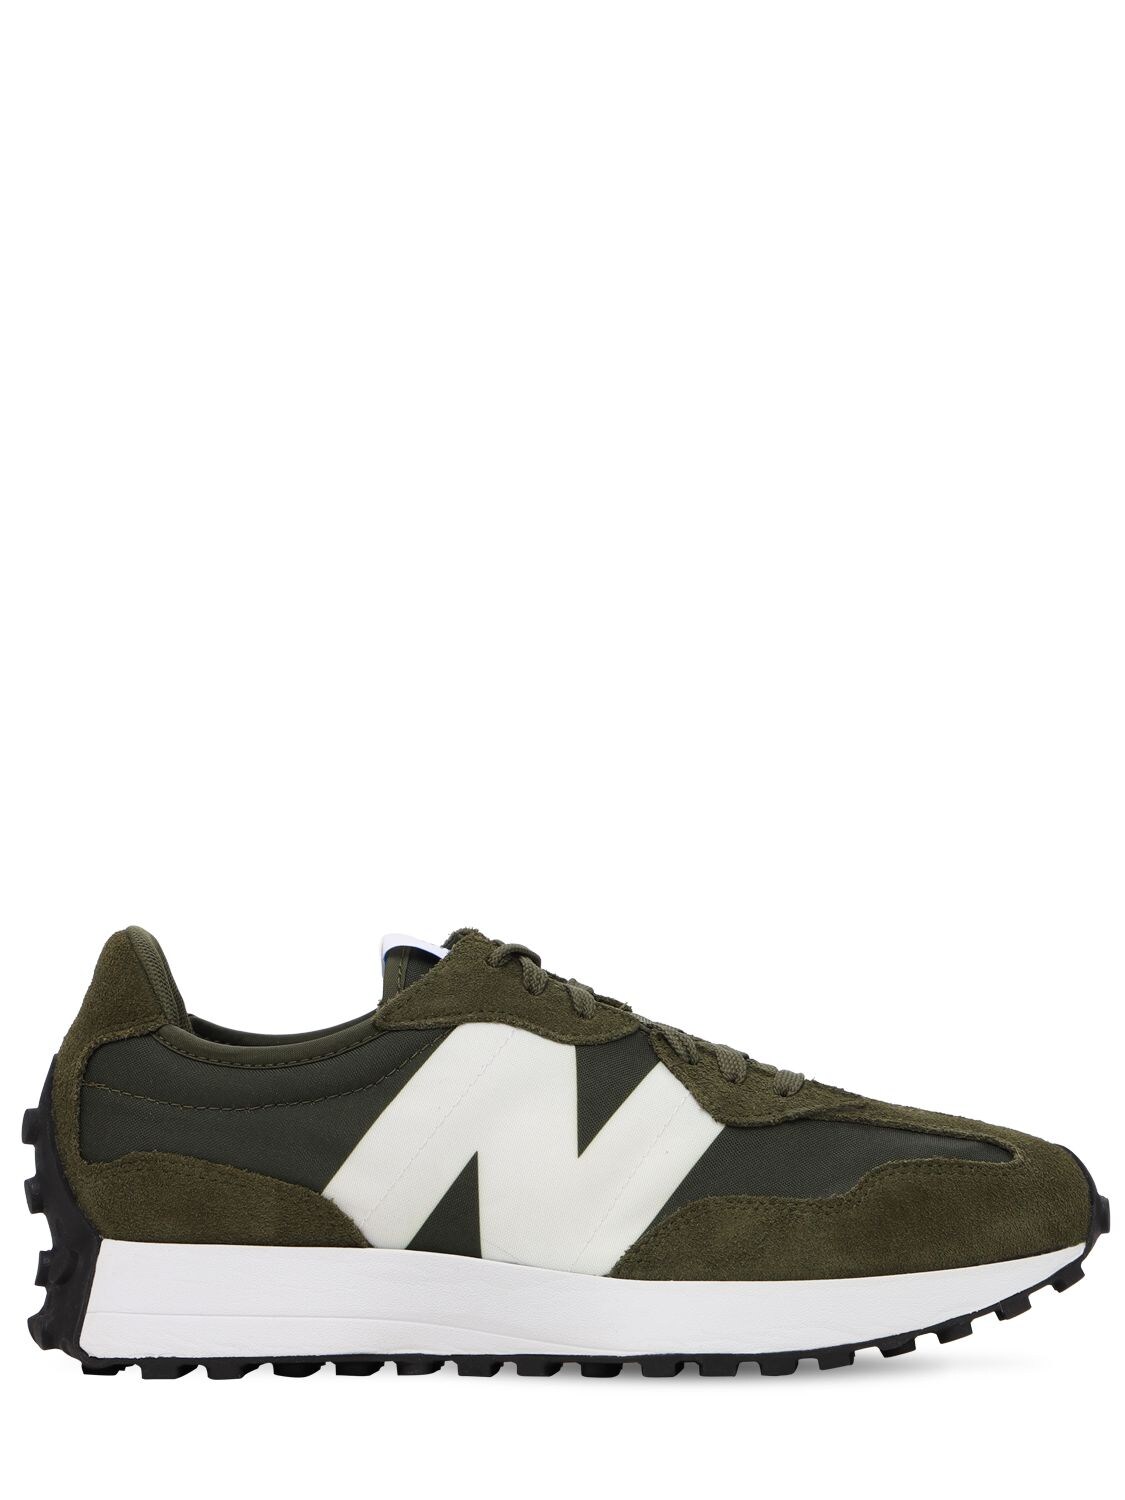 NEW BALANCE 327 SNEAKERS,72I4OW008-Q1BF0